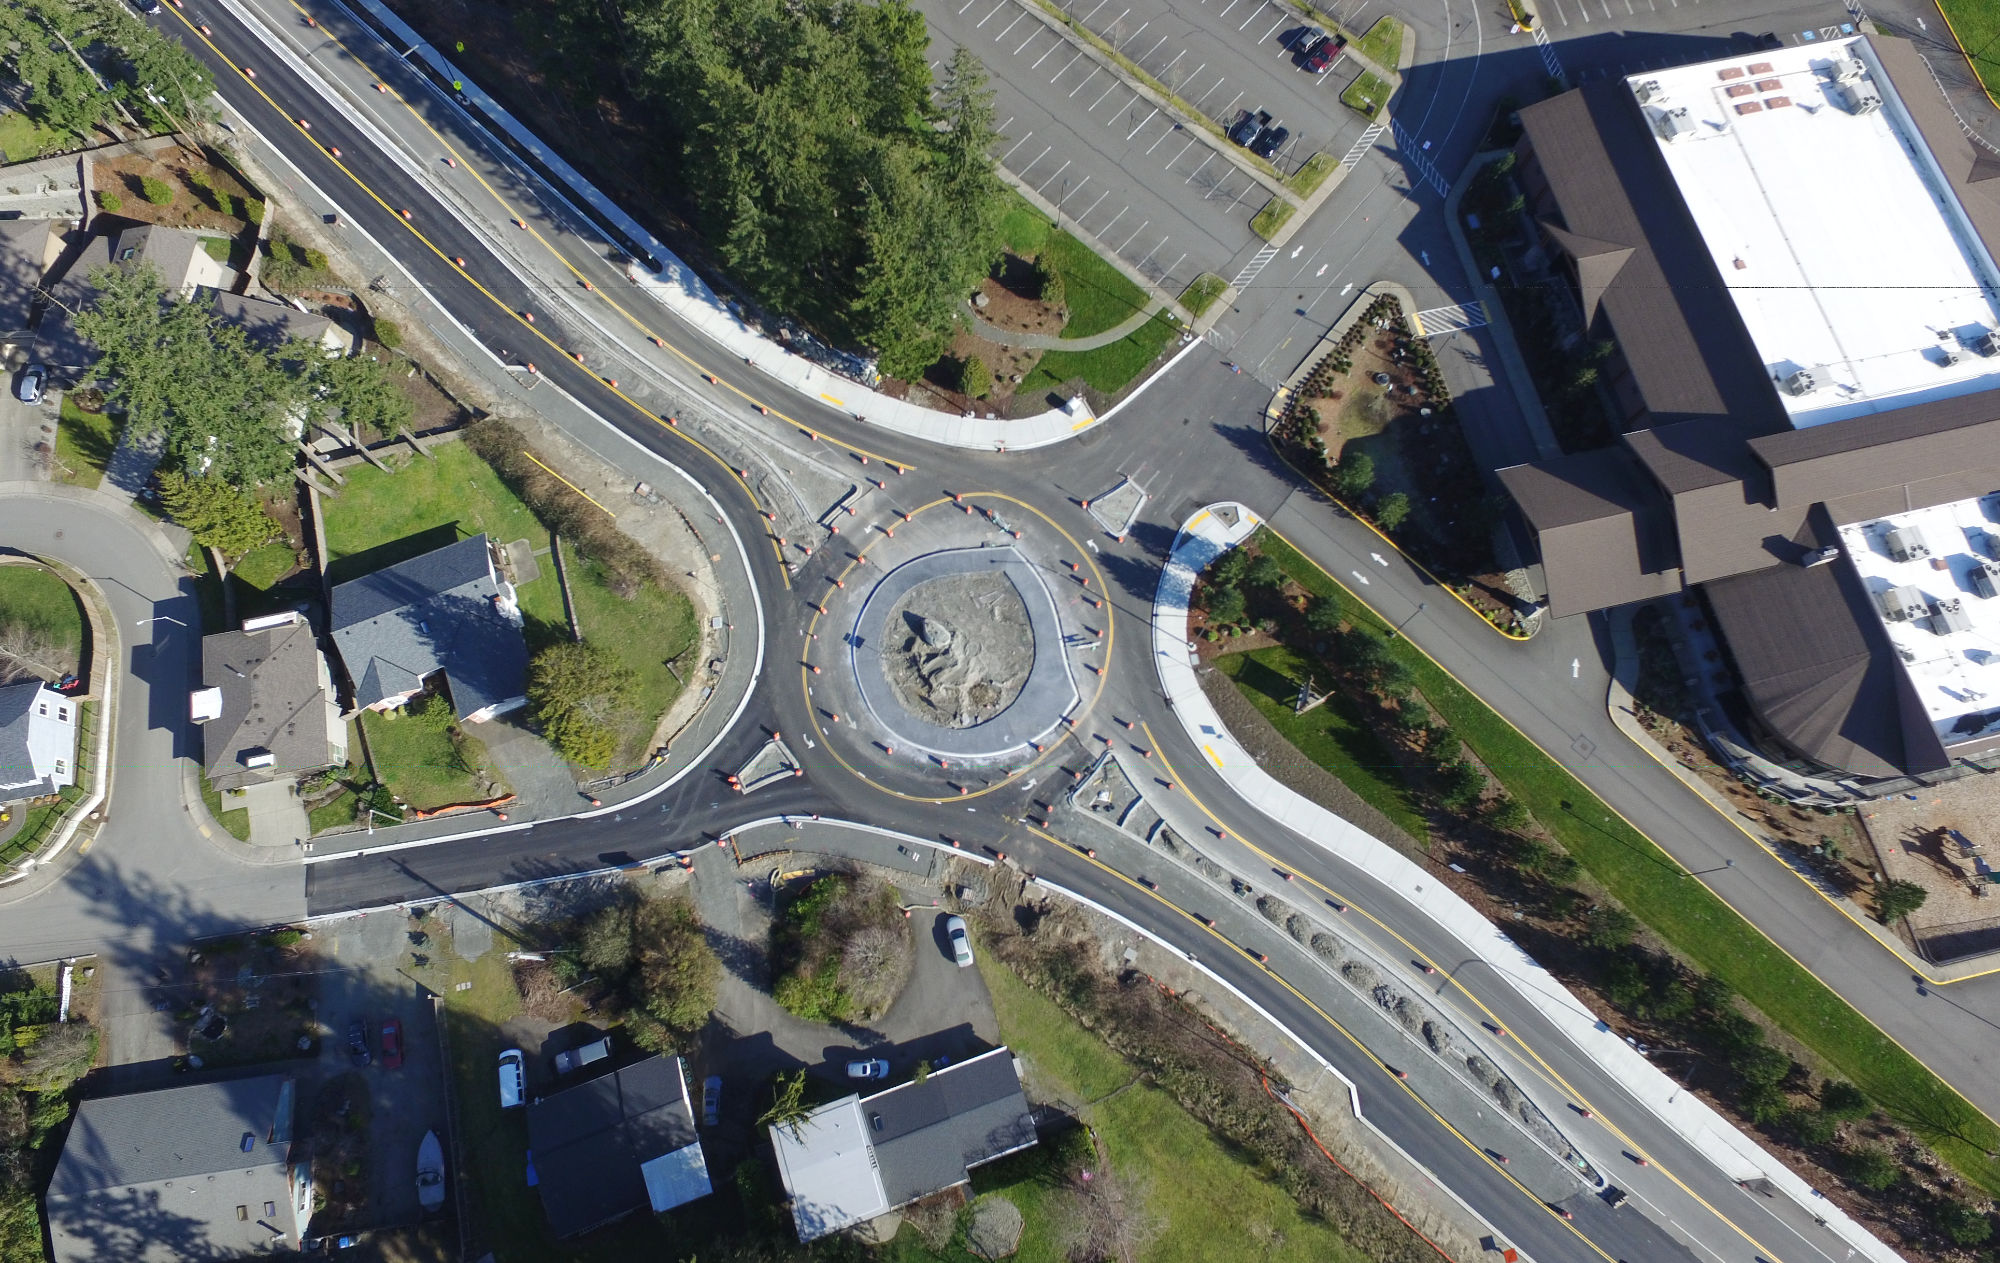 aerial view of roundabout at 242nd on Issaquah Fall City Road under construction, looking nearly complete